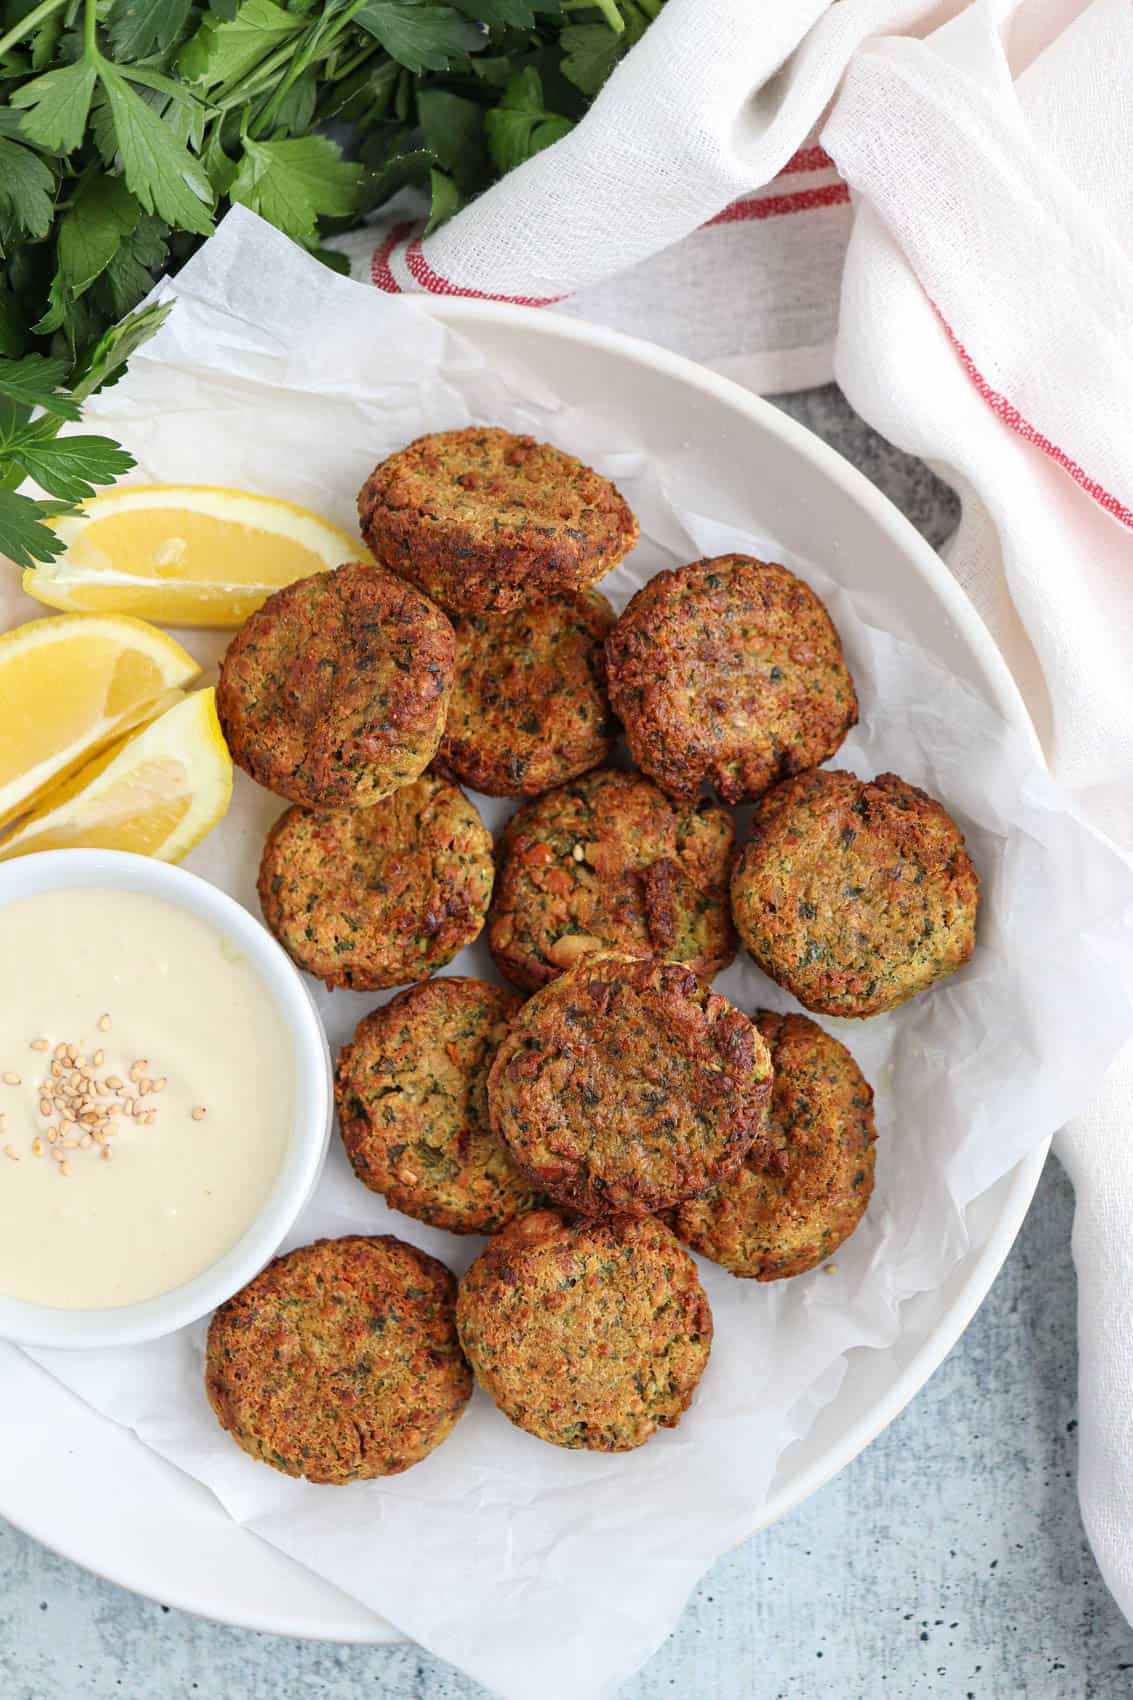 air fried falafel patties on a paper lined place with a side of tahini sauce and lemon wedges.